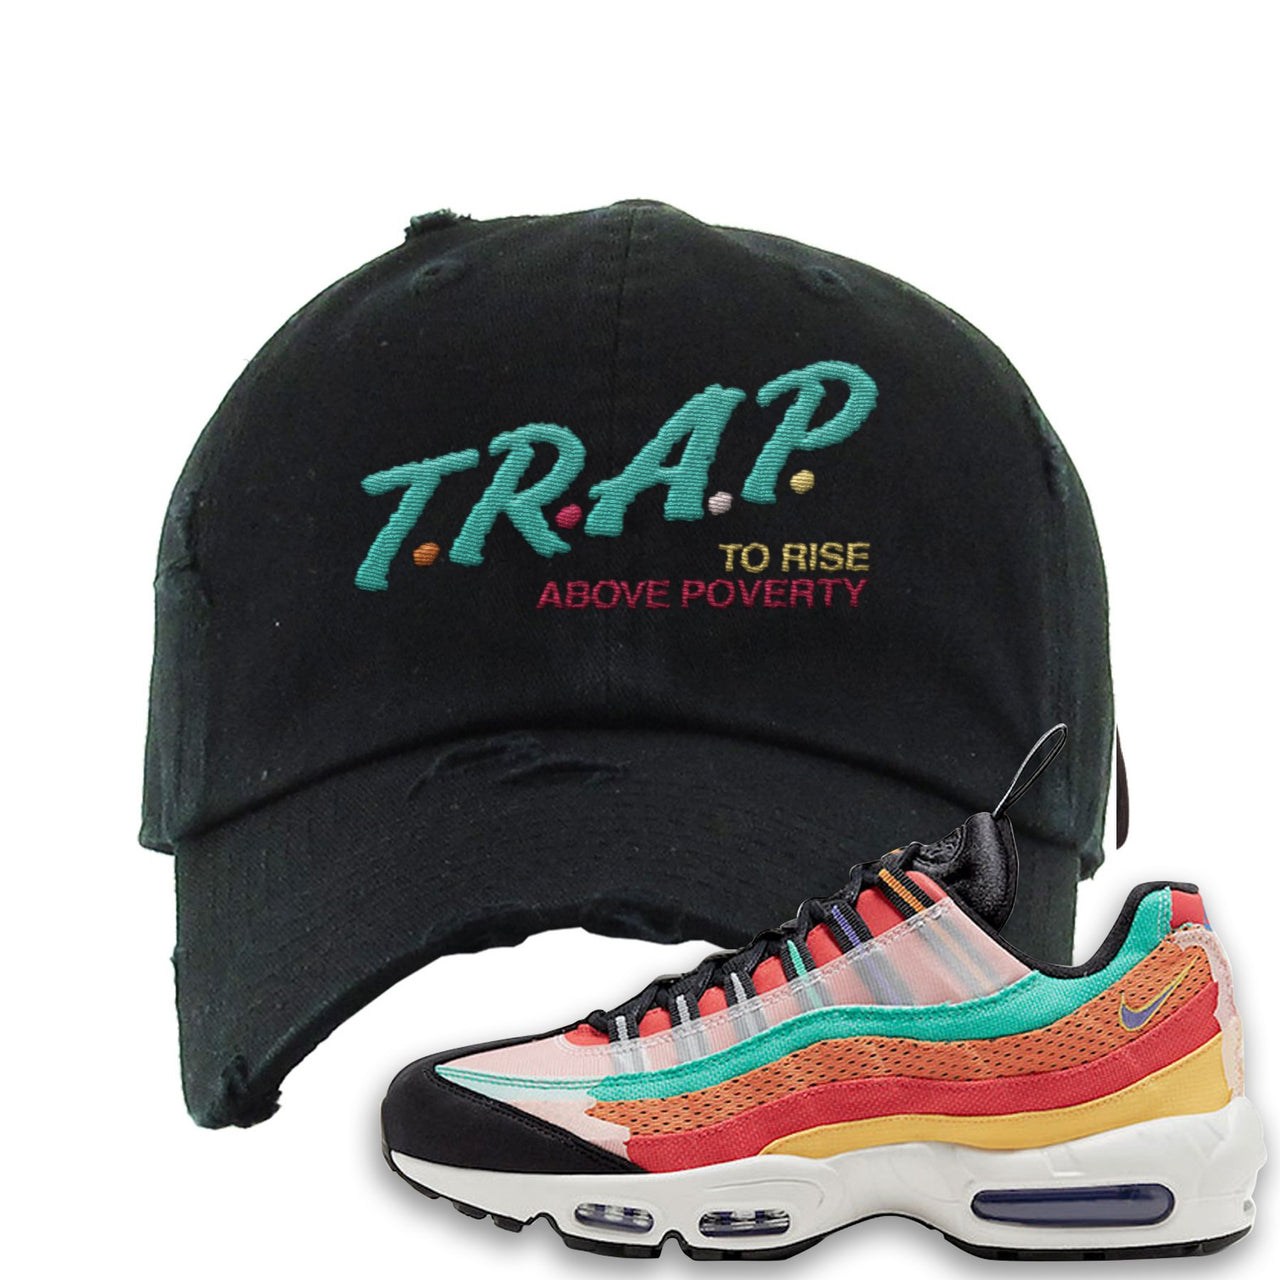 Air Max 95 Black History Month Sneaker Black Distressed Dad Hat | Hat to match Nike Air Max 95 Black History Month Shoes | Trap To Rise Above Poverty